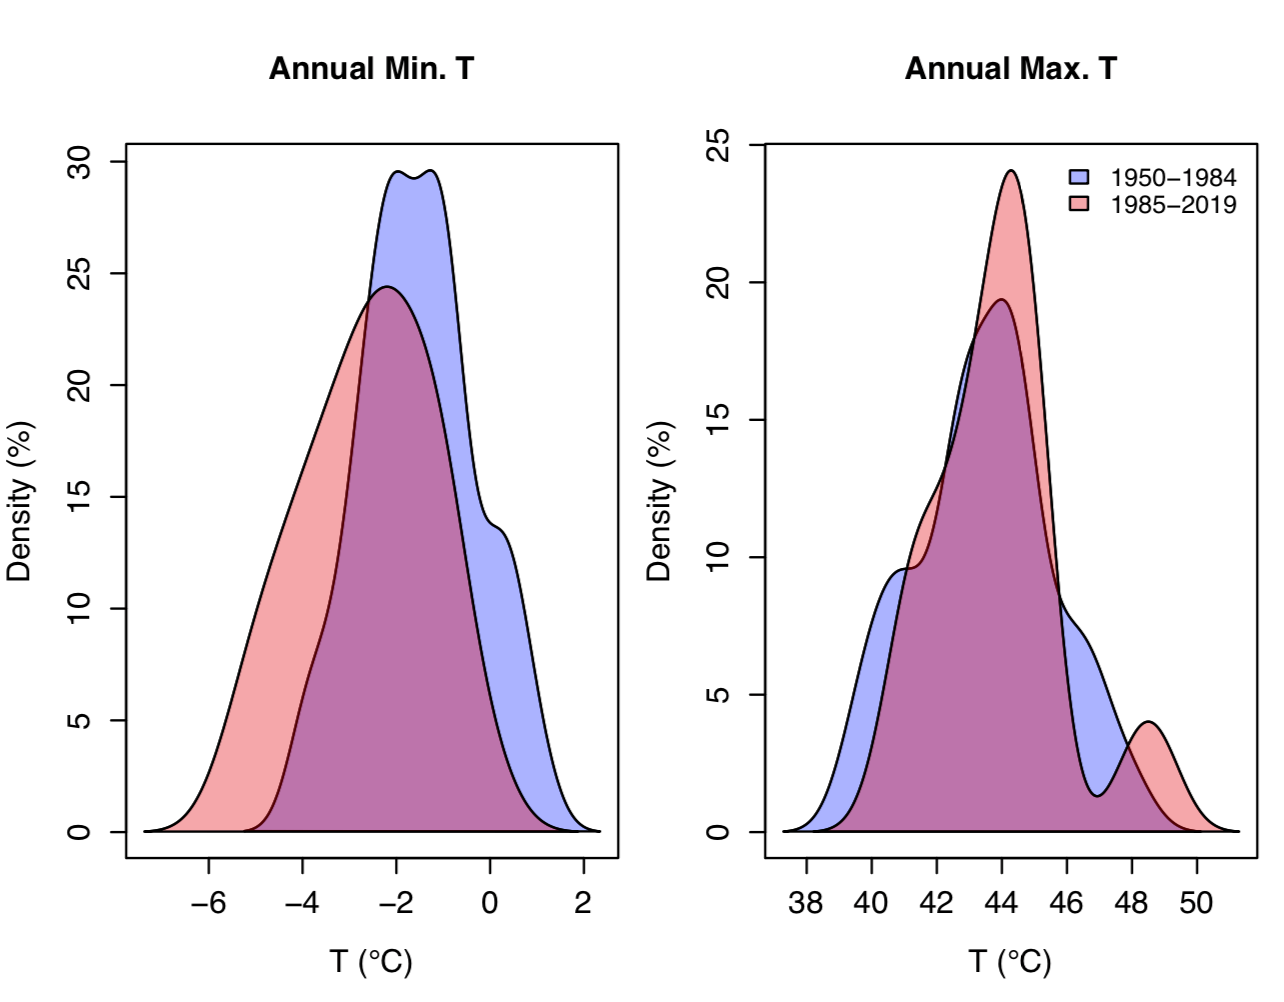 This graph shows the probability distributions of annual minimum temperature (left) and annual maximum temperature (right) extremes for Walgett for two periods, 1950 to 1984 and 1985 to 2019.